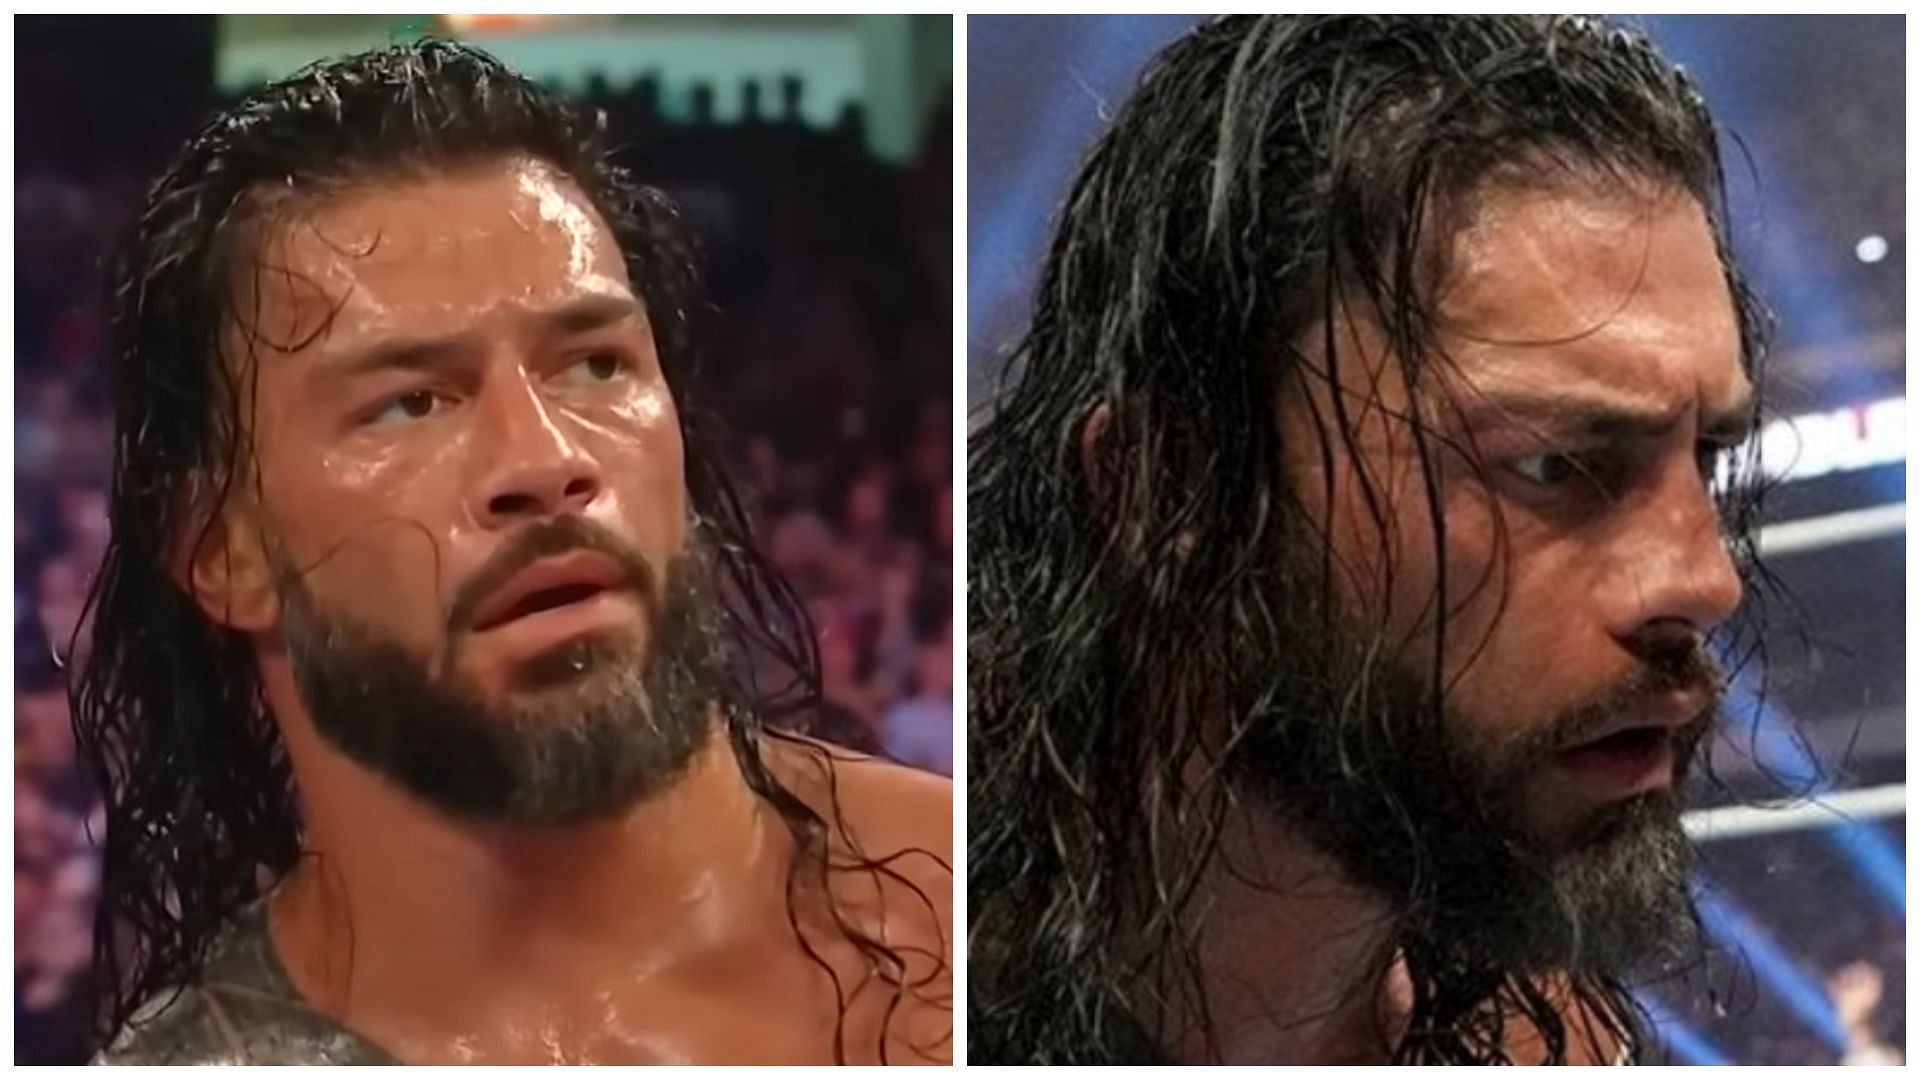 Roman Reigns is the longest reigning WWE Undisputed Universal Champion.